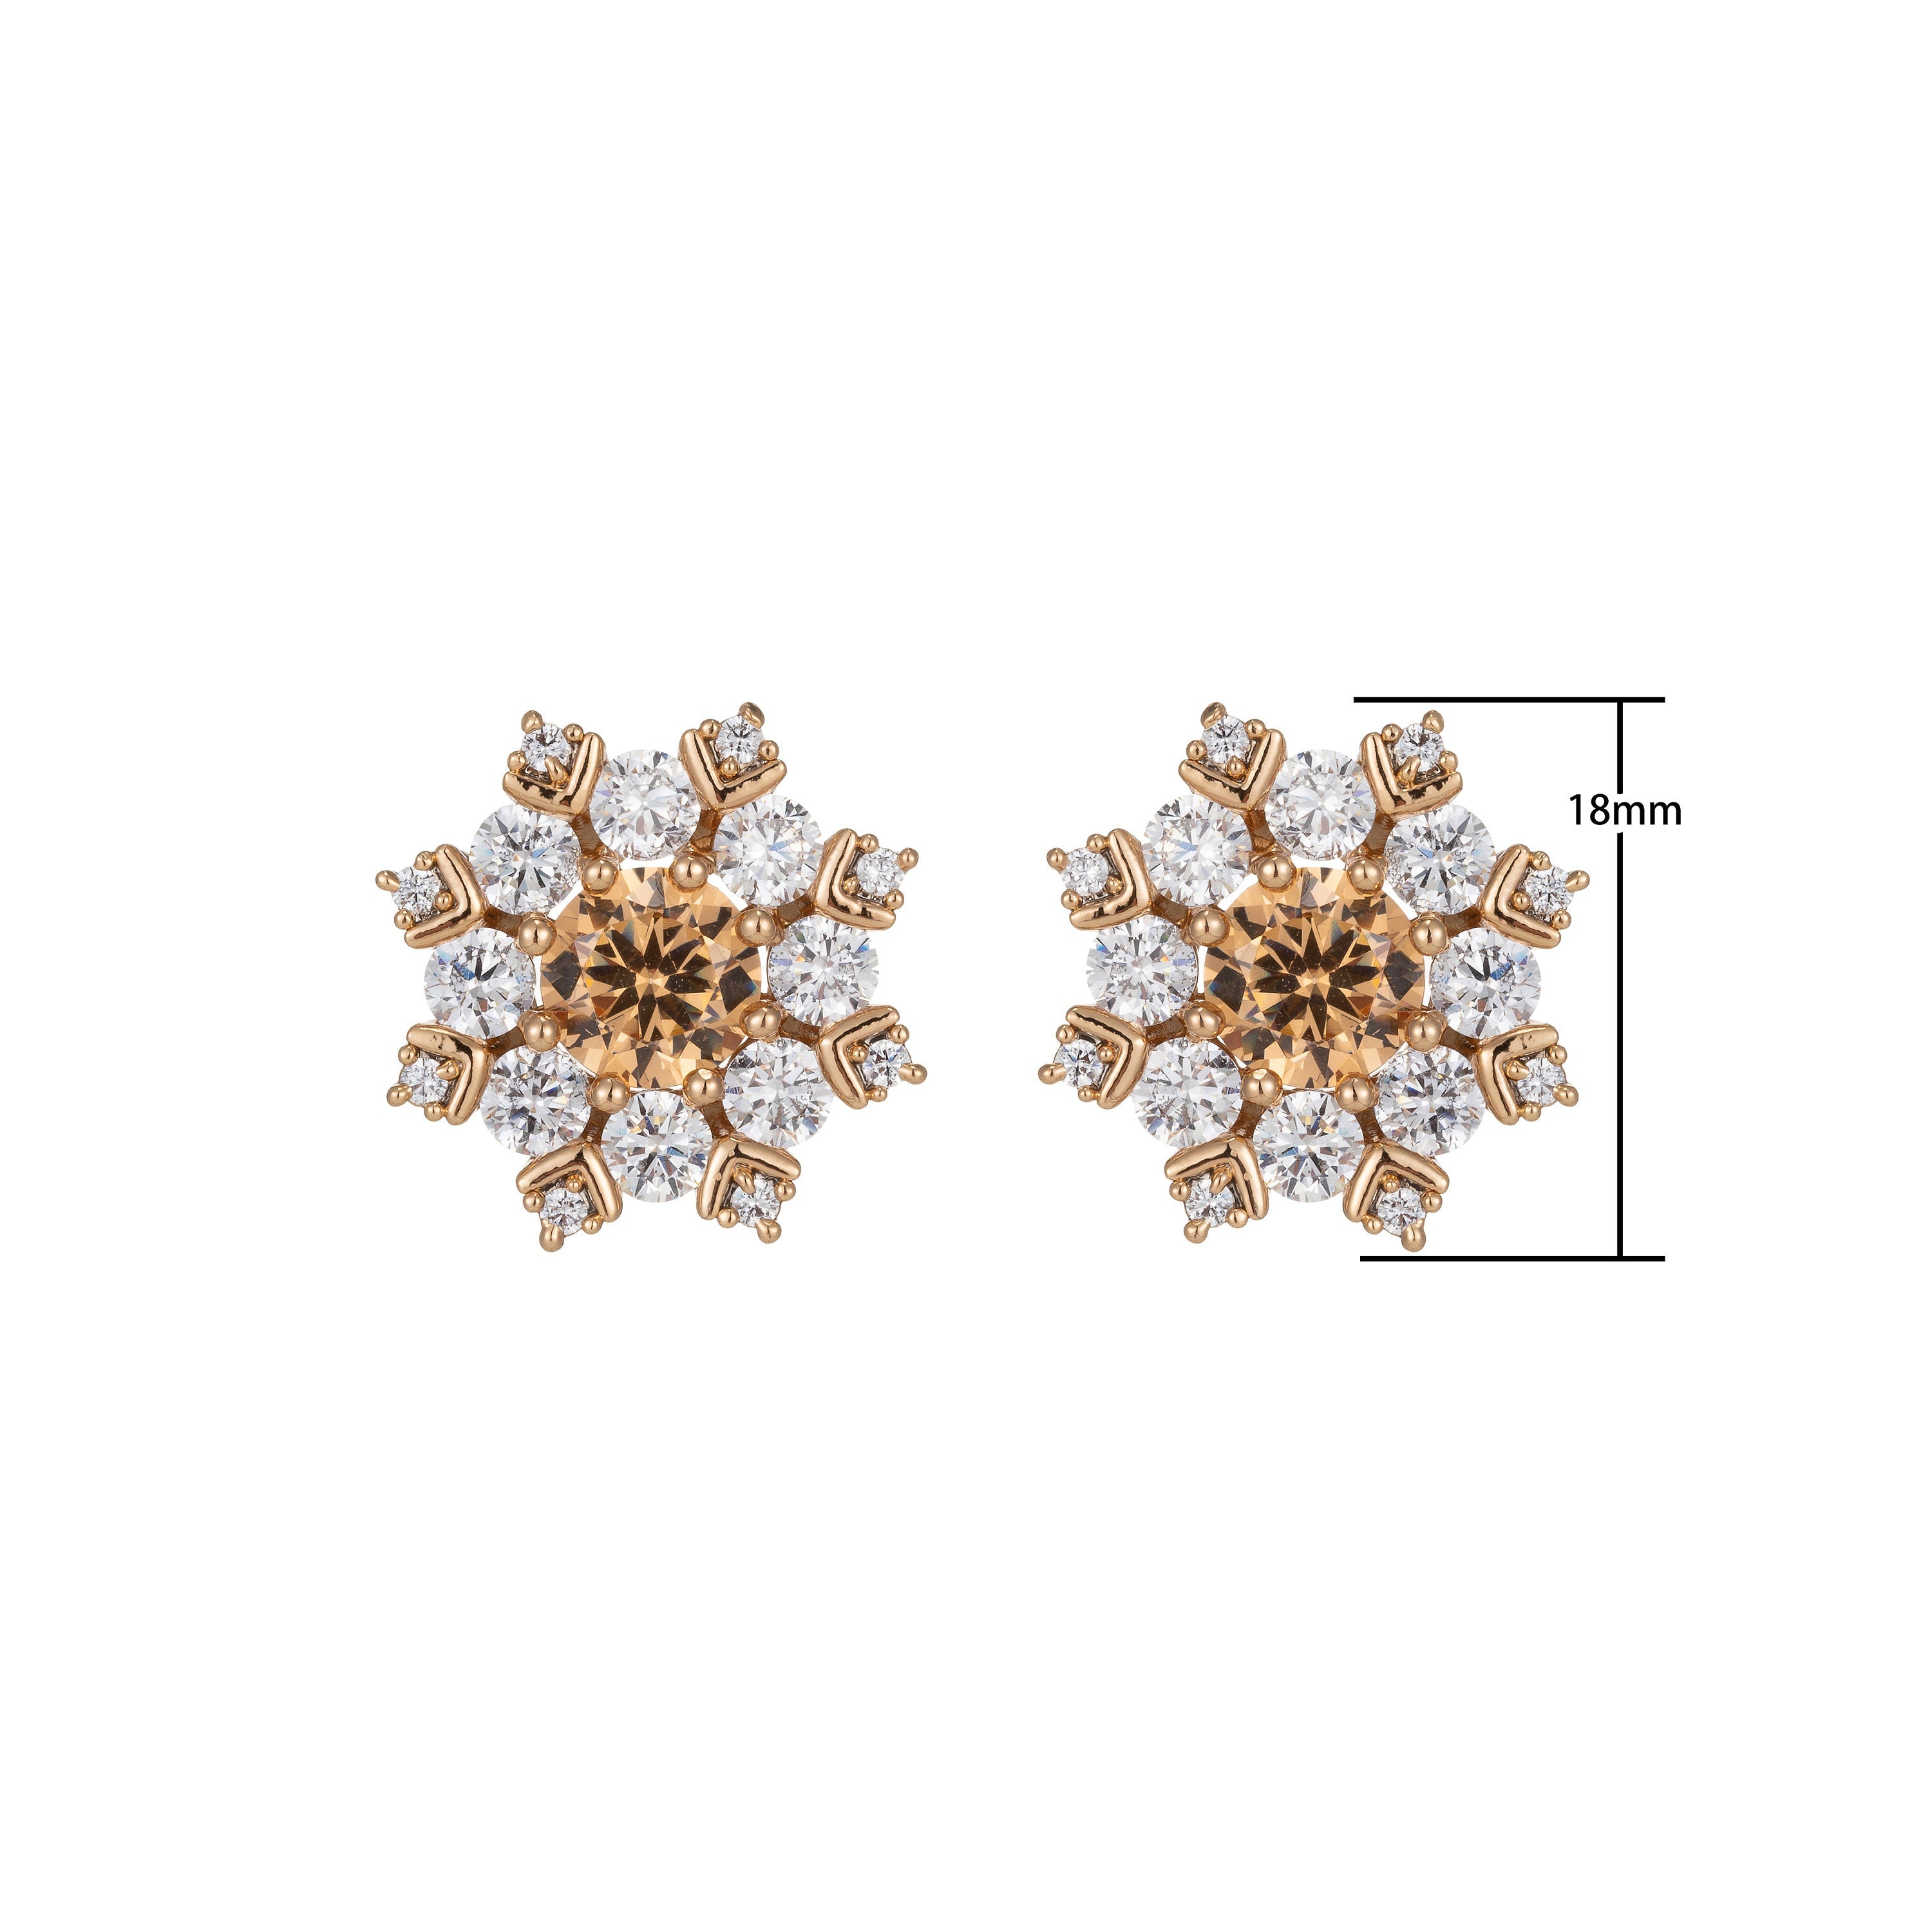 Topaz Snowflake Stud Earrings Gold Filled Cz Snowflakes Earrings Pink Stud Earrings Wedding Jewelry Best friend Gift for her - DLUXCA